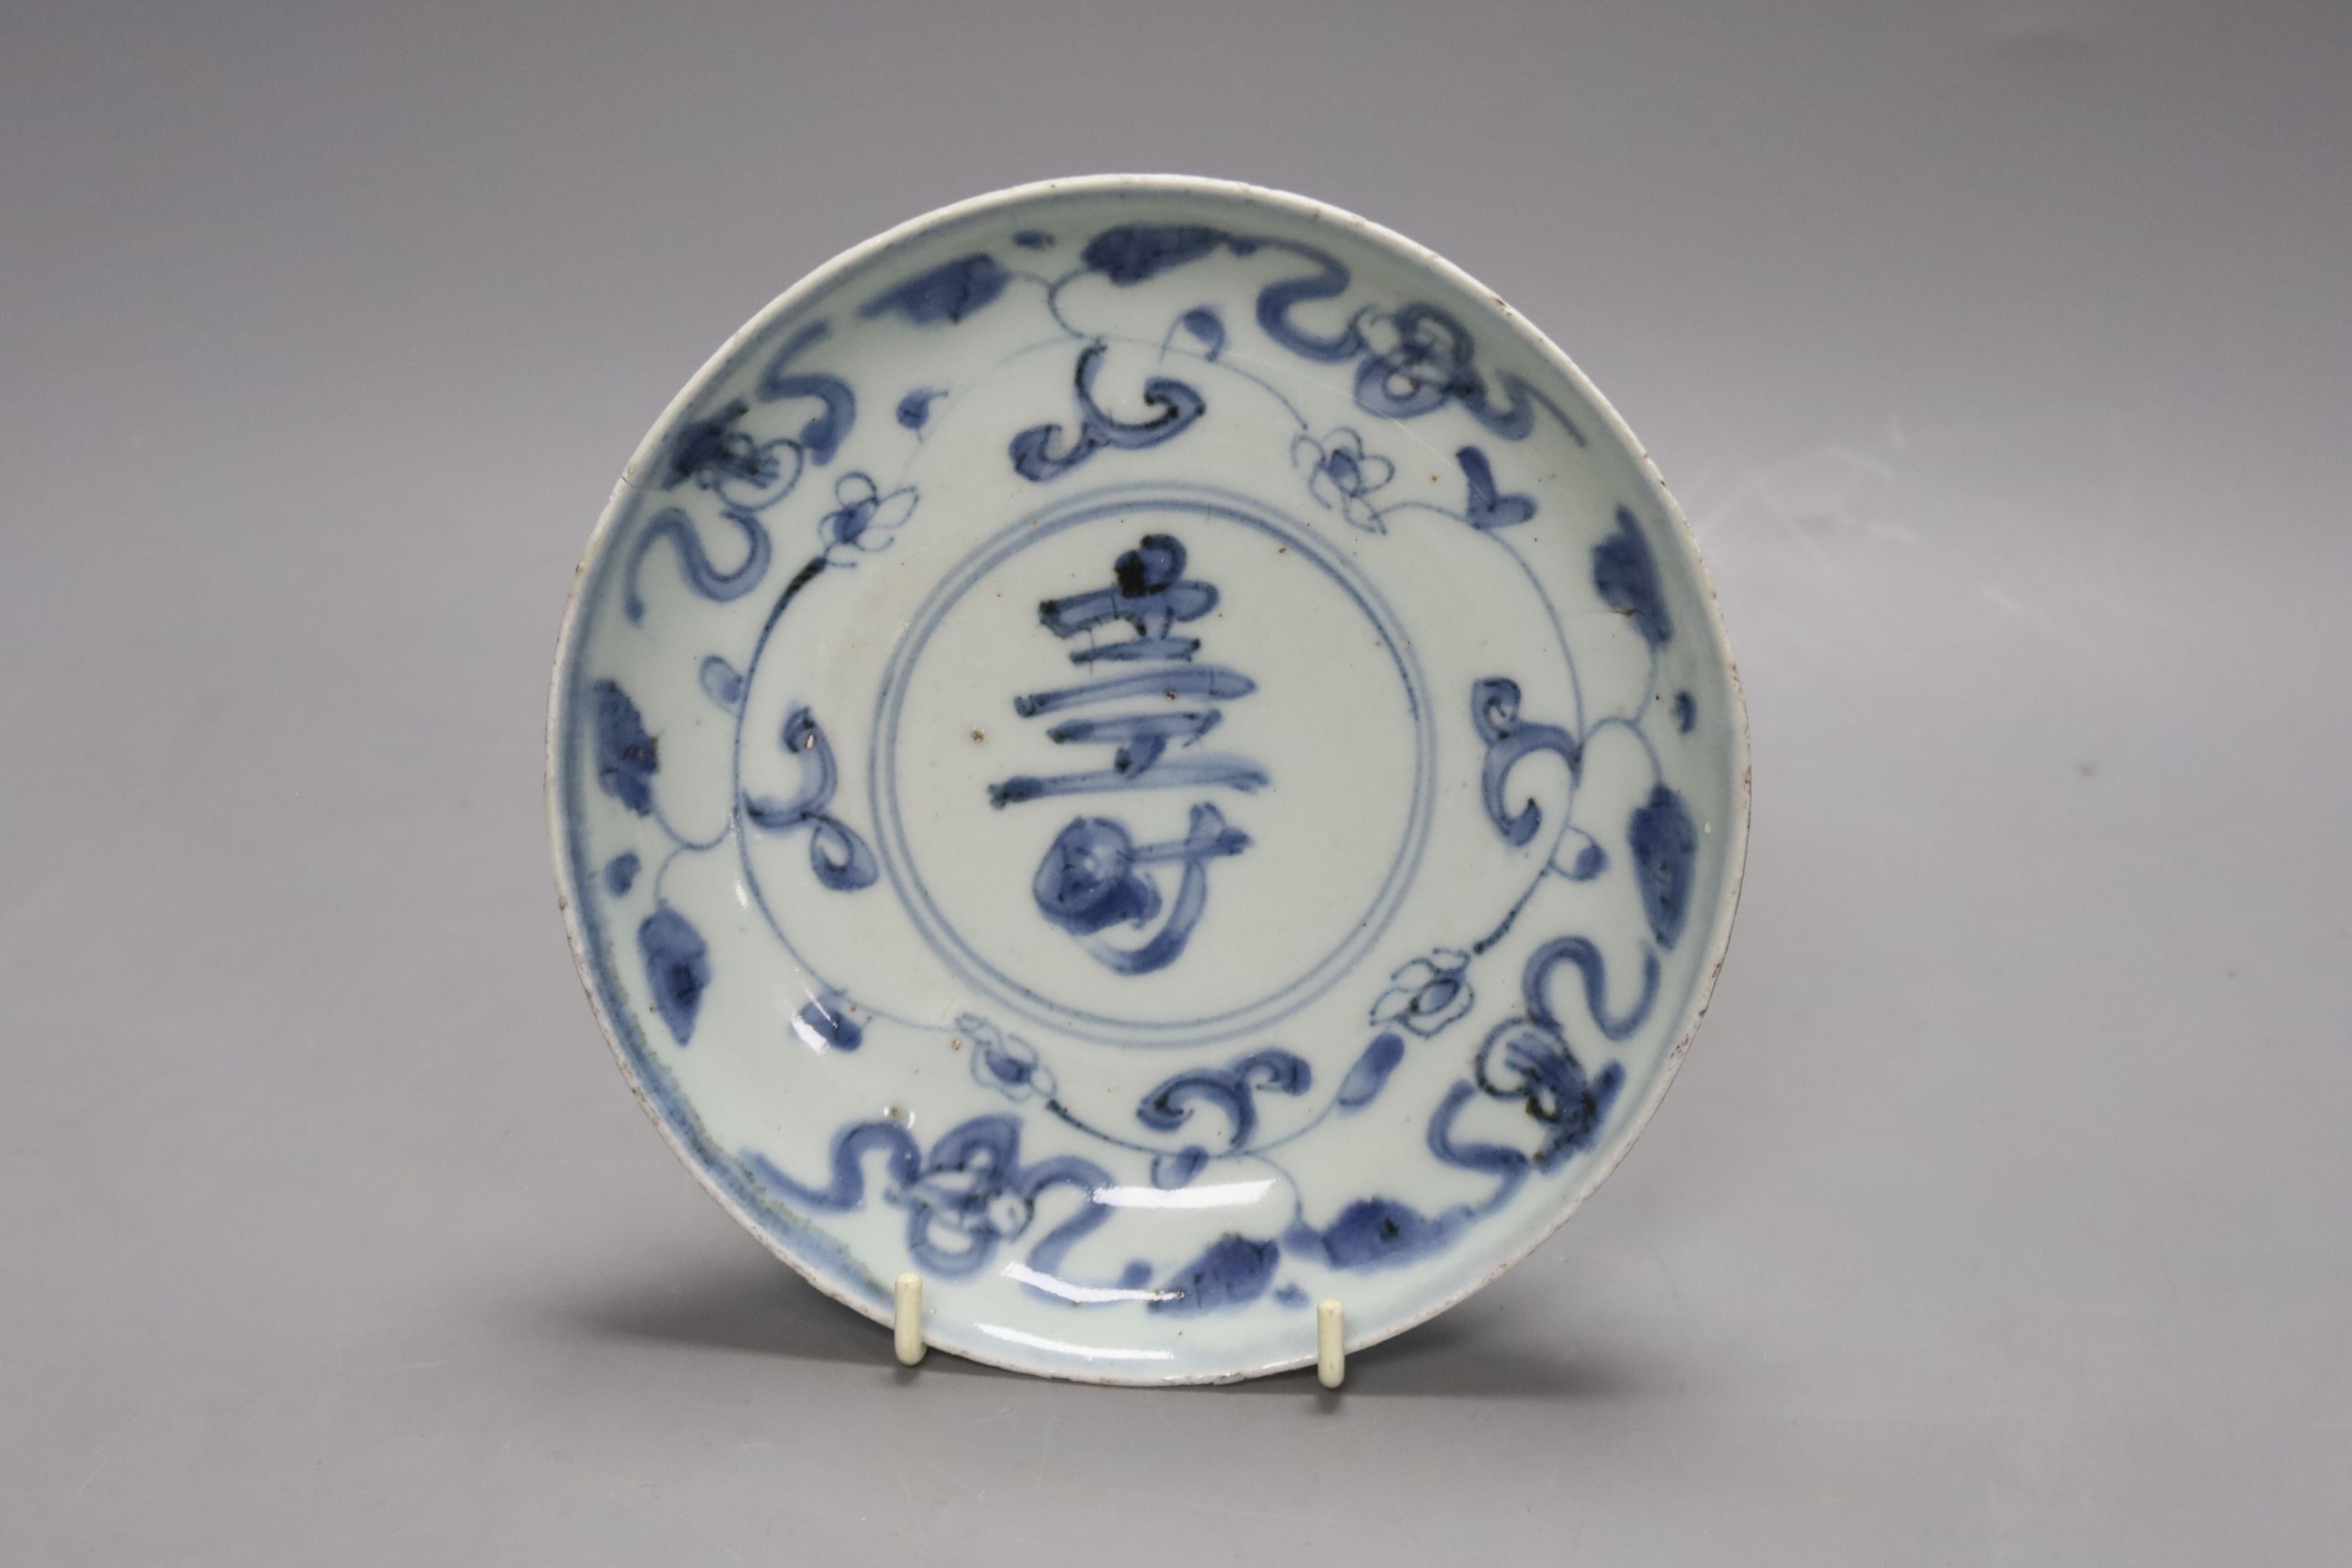 A Chinese blue and white saucer dish, late Transitional - early Kangxi period, diameter 17cm